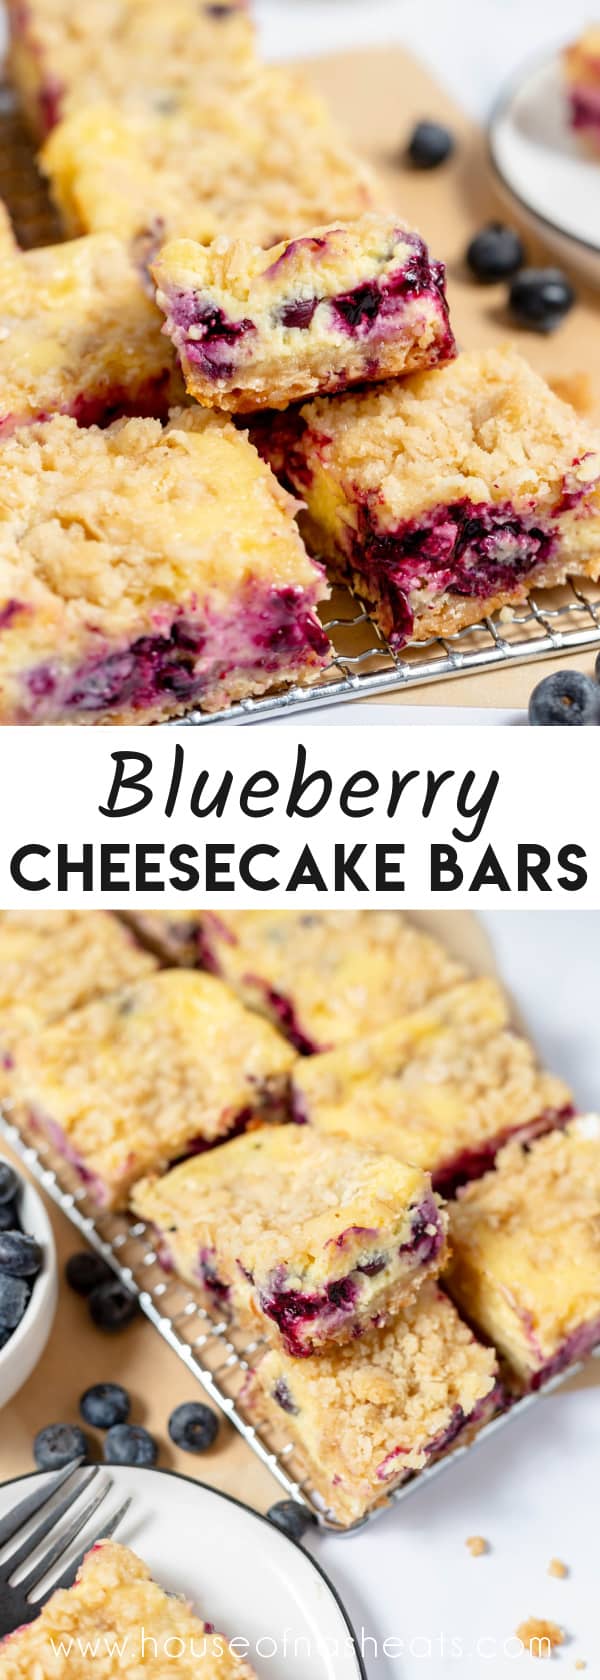 A collage of images of blueberry cheesecake bars with text overlay.